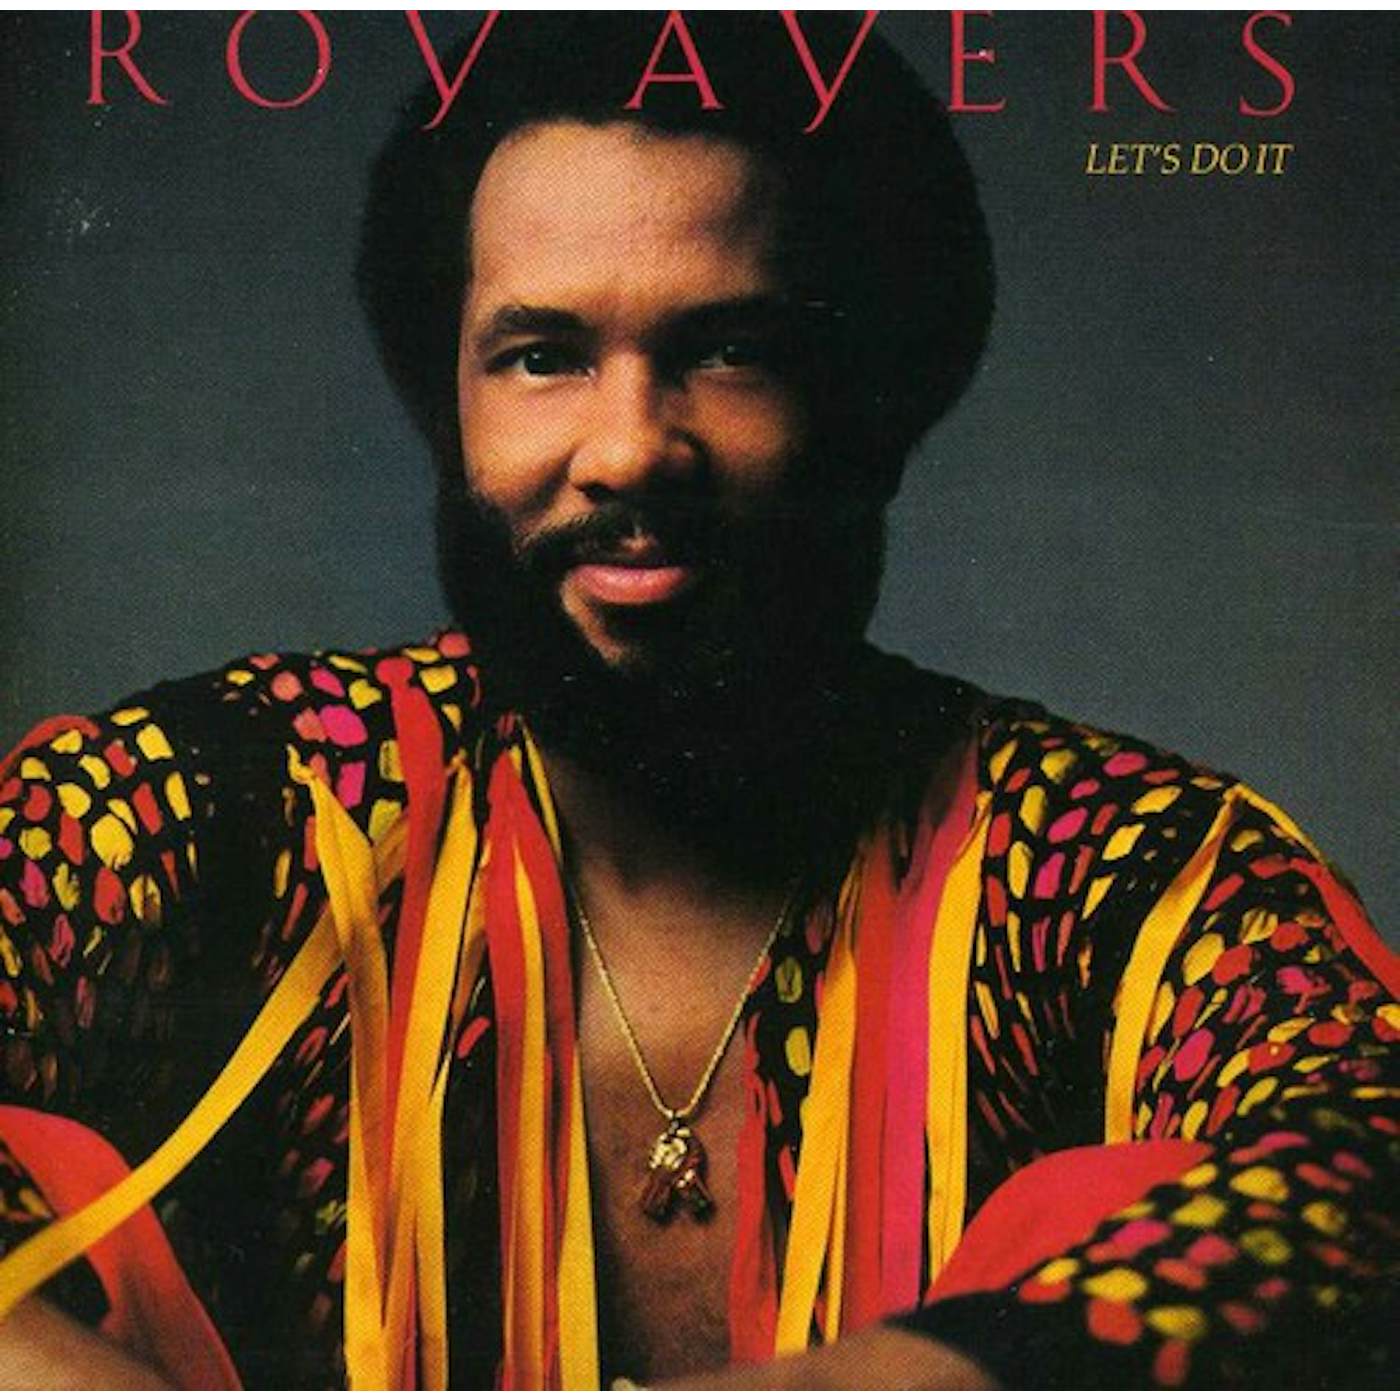 Roy Ayers LET'S DO IT CD